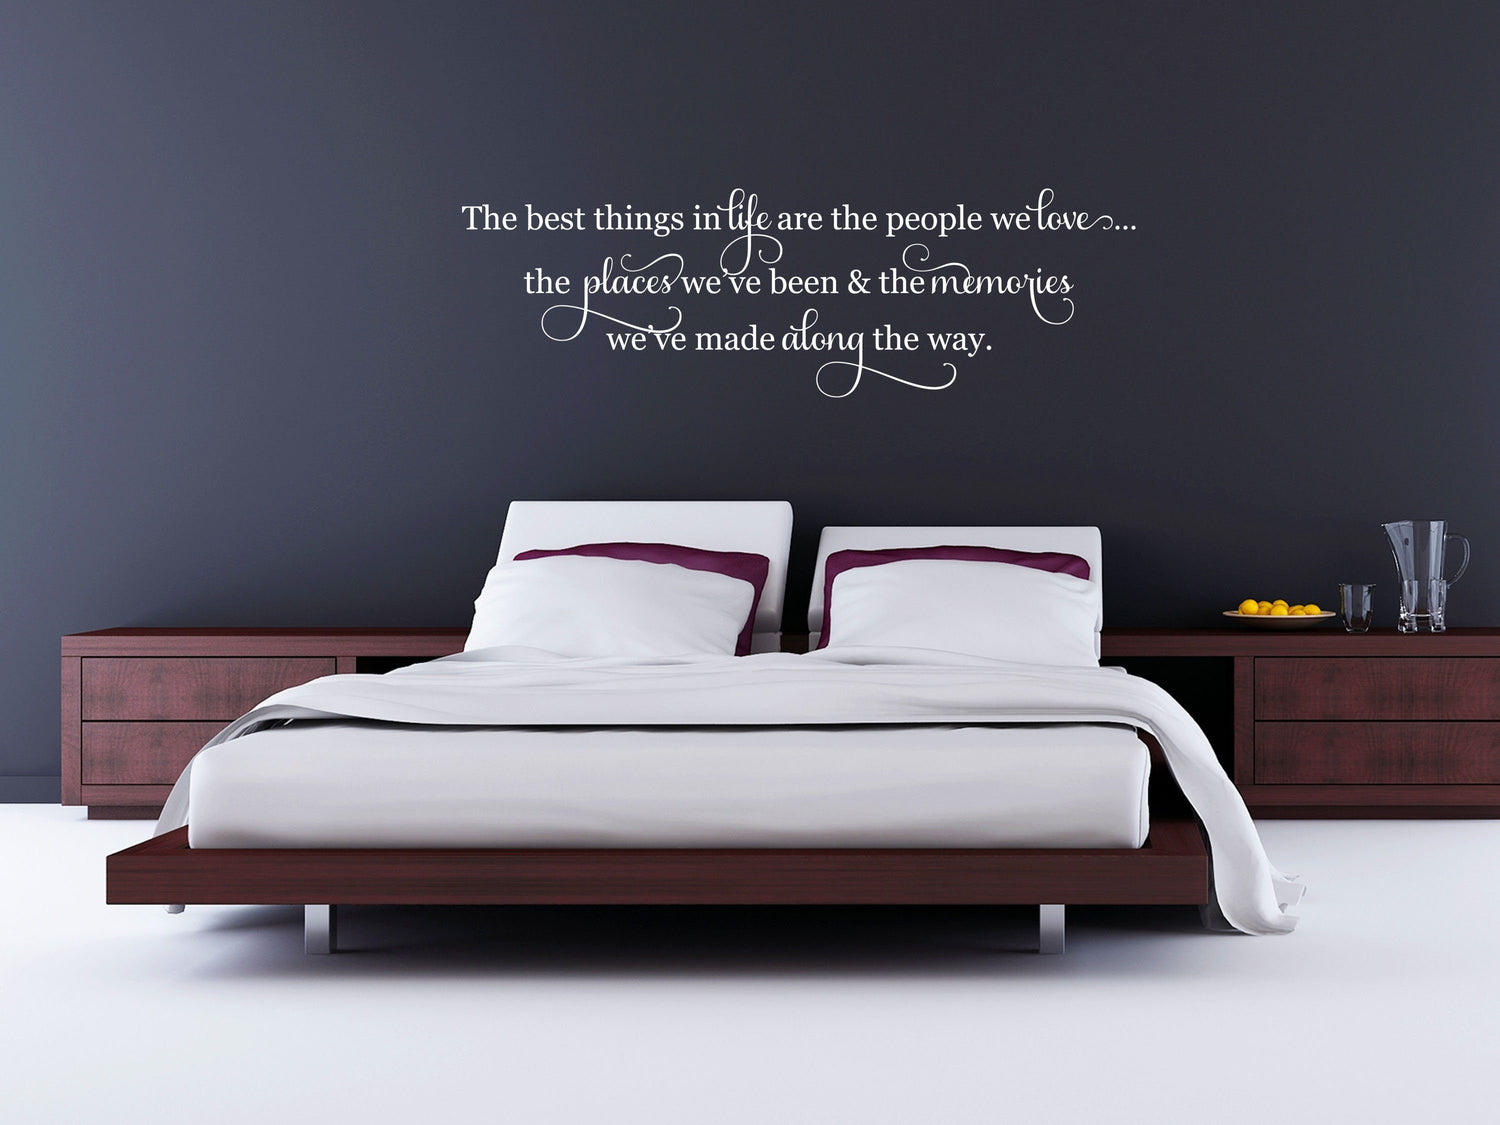 The Best Things In Life - Inspirational Wall Signs Vinyl Wall Decal Done 